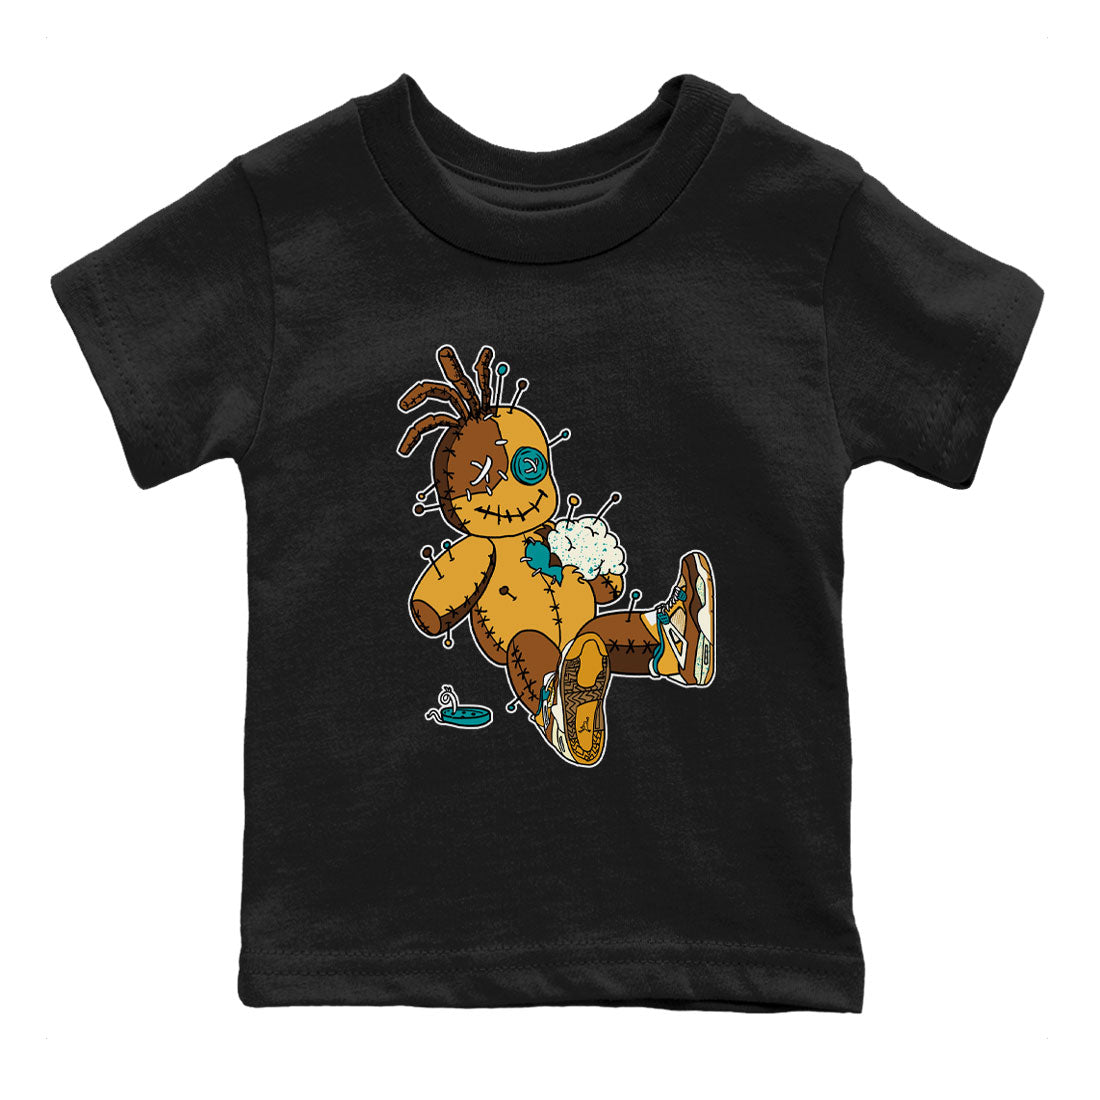 4s Cacao Wow shirt to match jordans Voodoo Doll sneaker tees Air Jordan 4 Cacao Wow SNRT Sneaker Release Tees Baby Toddler Black 2 T-Shirt